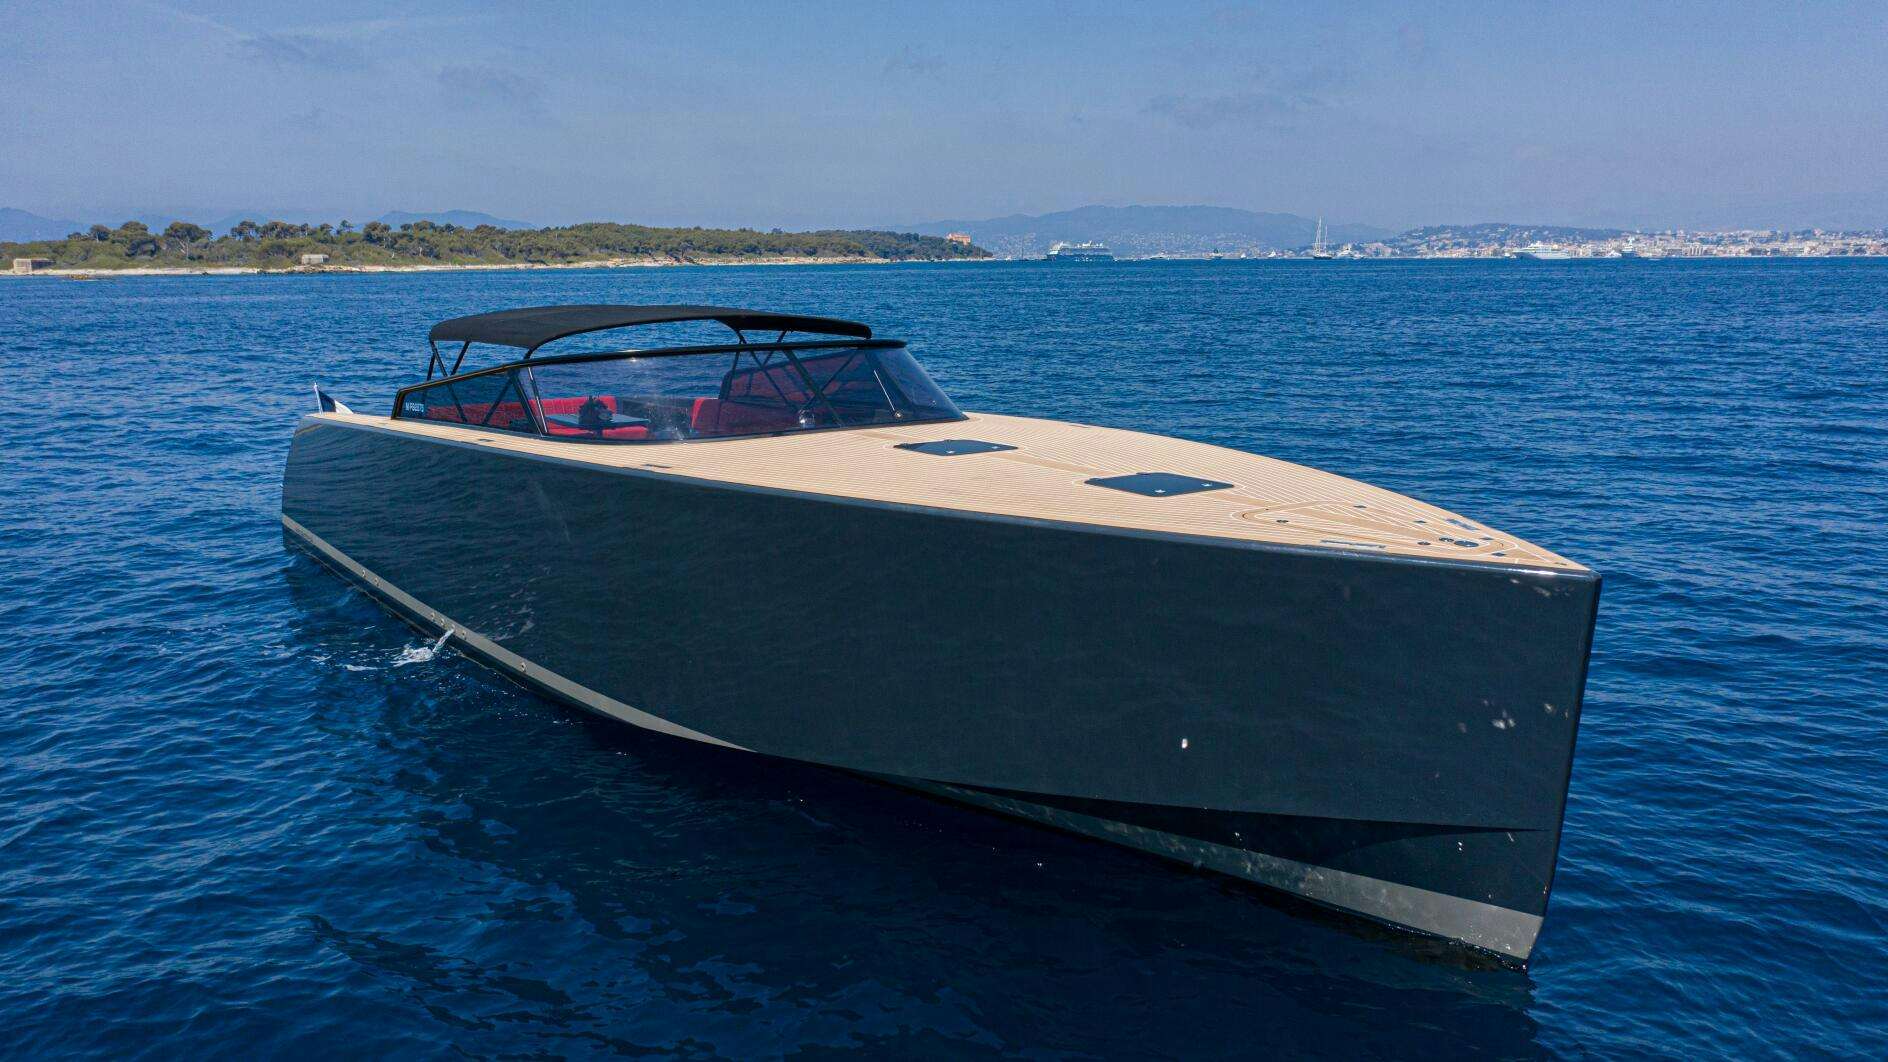 Biancino 2
Yacht for Sale